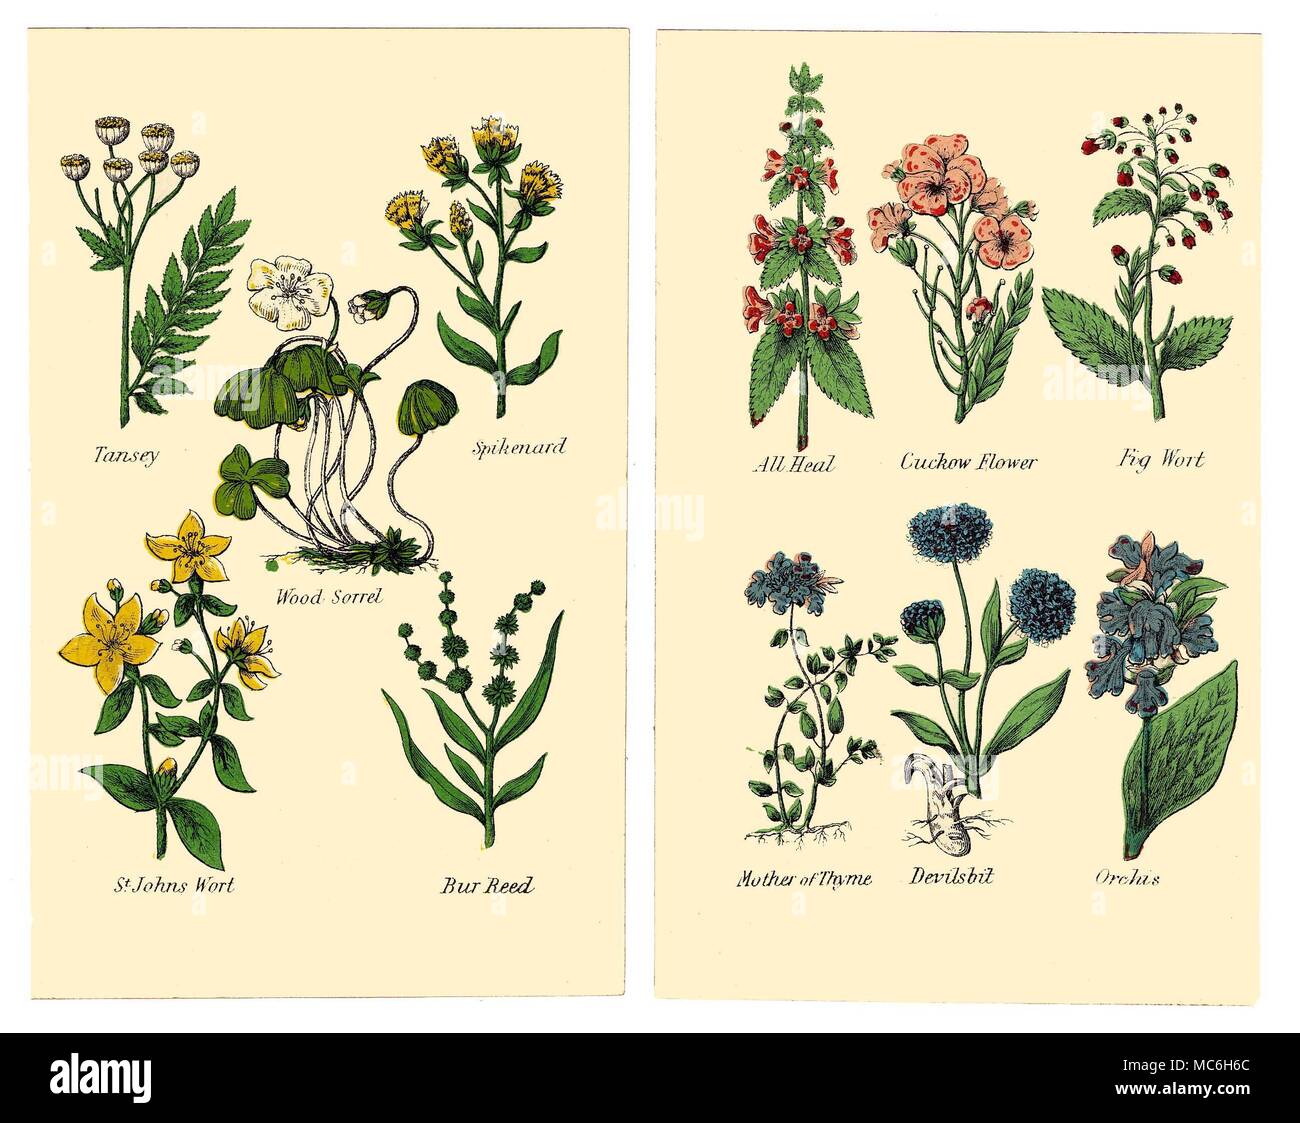 HERBS AND FLOWERS The following plants are from two plates in the 1869 Halifax edition of Matthew Robinson's The New Family Herbal. Tansey, Spikenard, Wood Sorrel, St. John's Wort, Bur Reed. All Heal, Cuckow Flower, Fig Wort, Mother of Thyme, Devilsbit, Orchis. Stock Photo